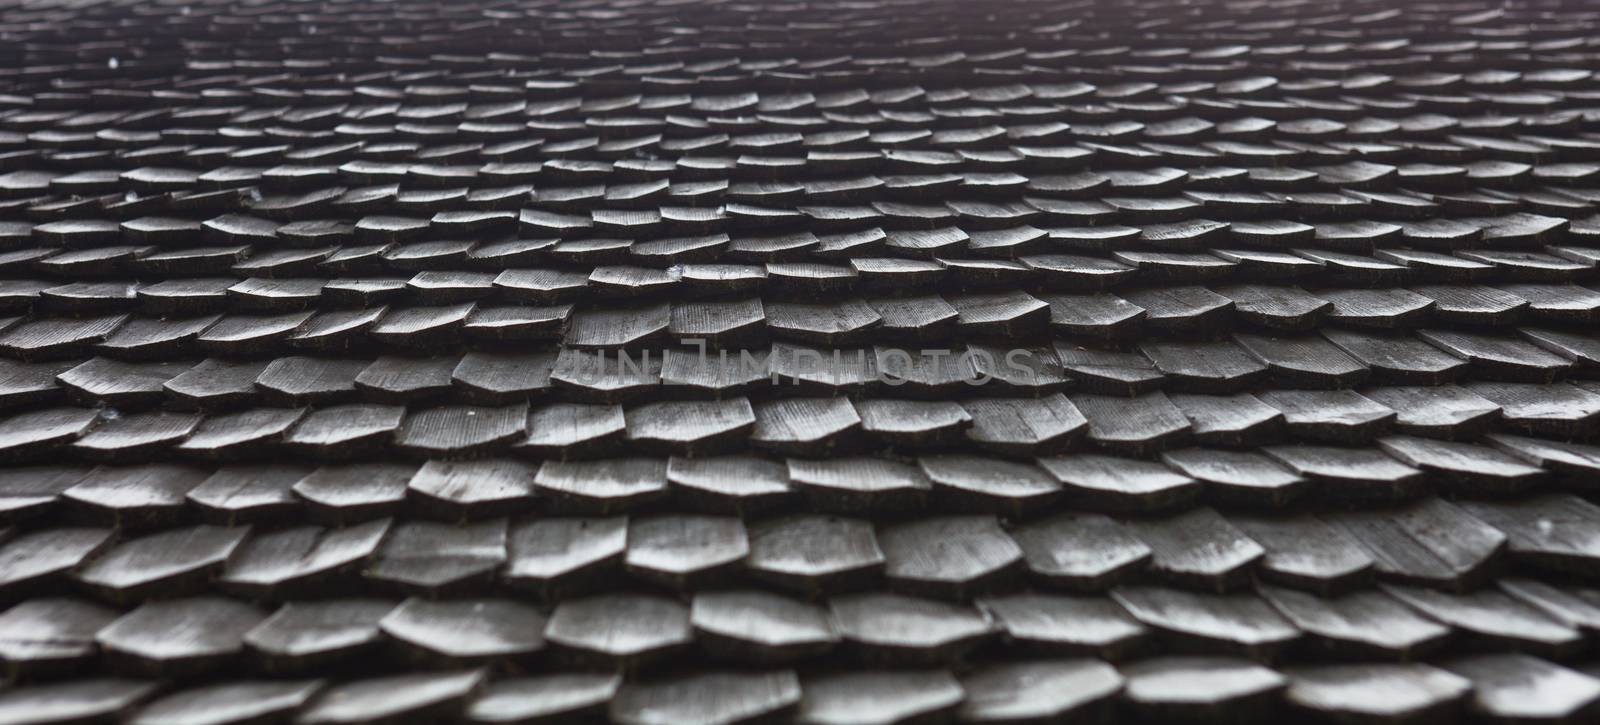 Old wooden shingle roof by rootstocks